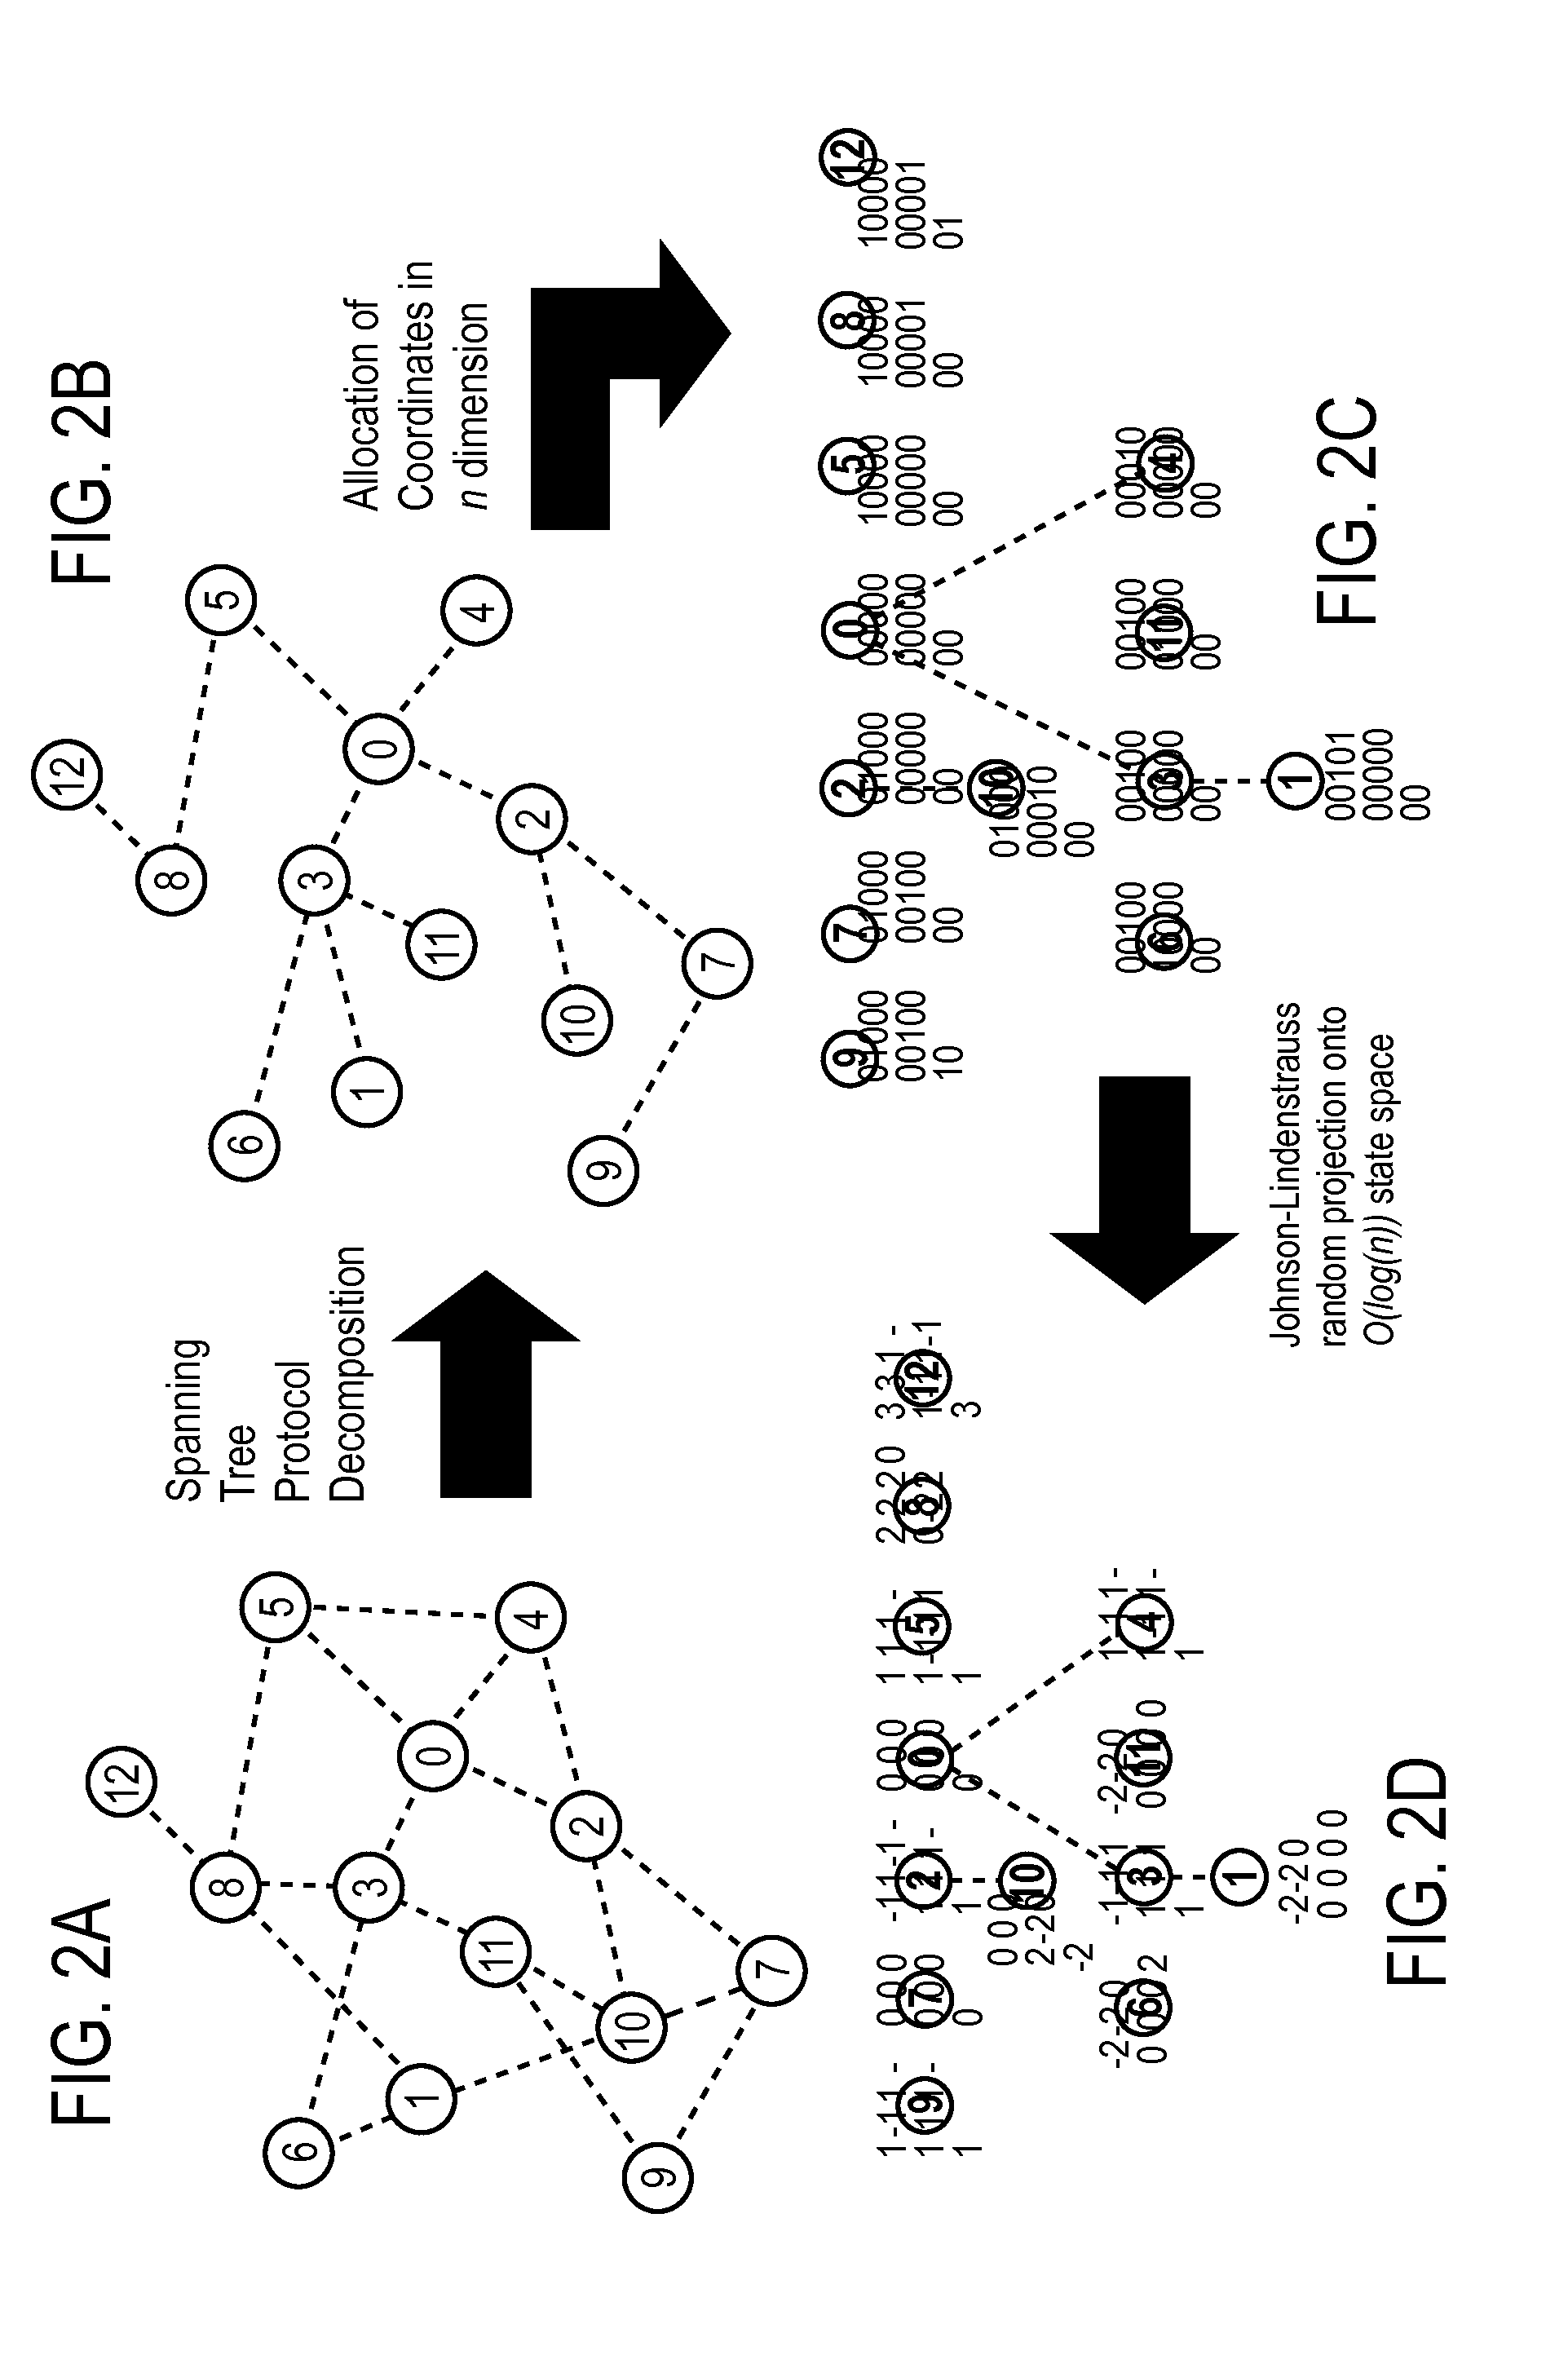 Method for scalable routing with greedy embedding